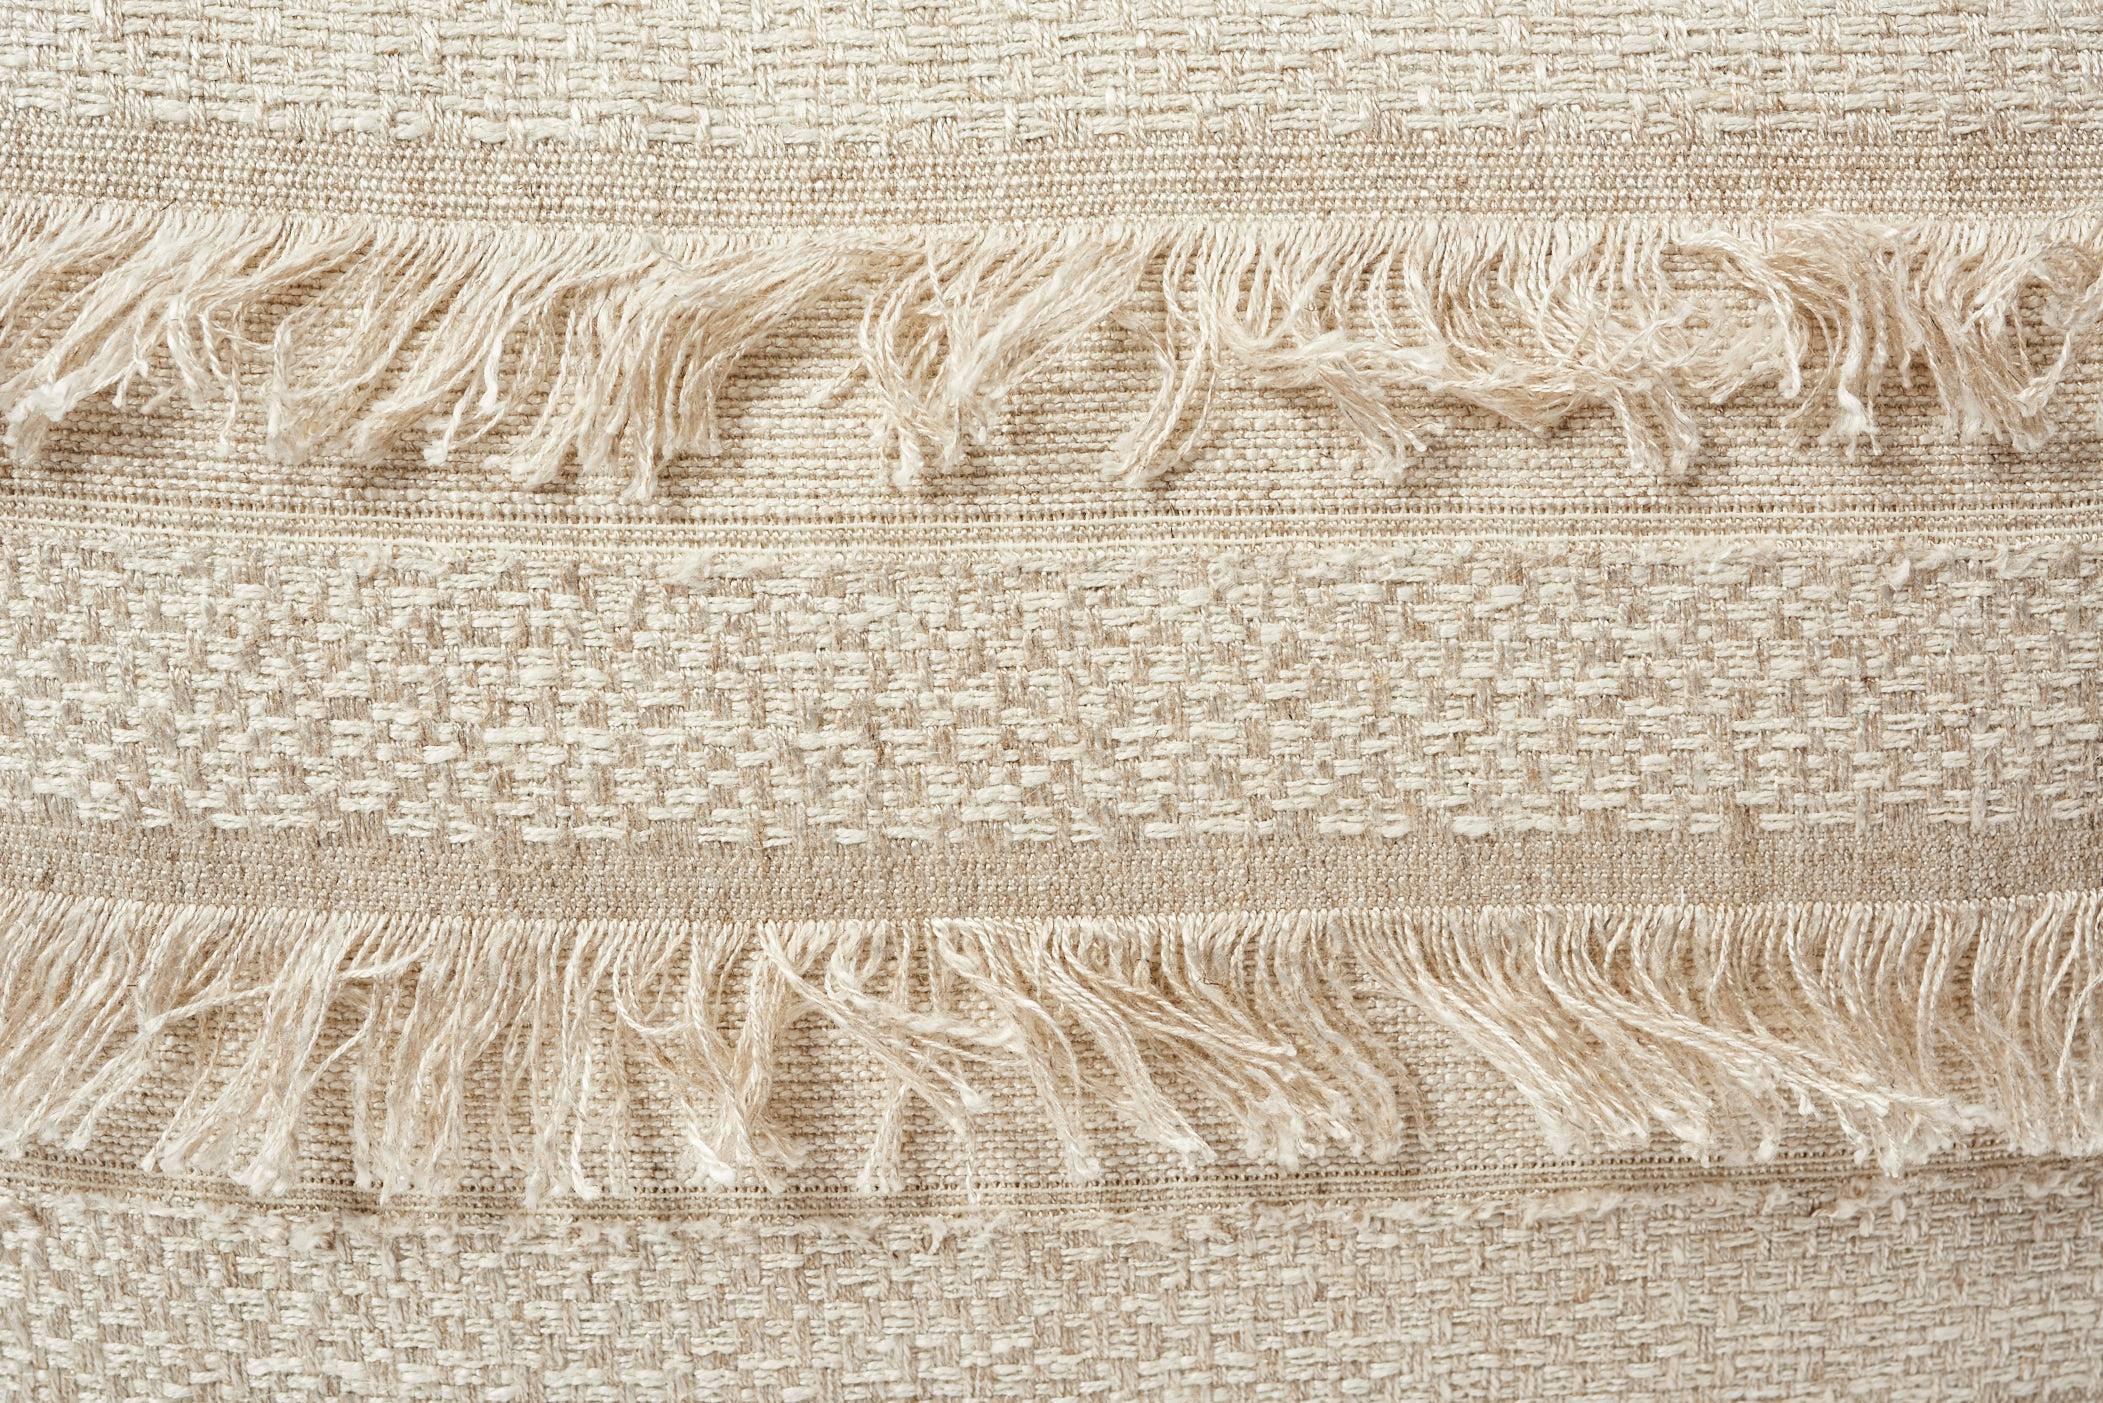 A horizontal fringed stripe, Schumacher's Acadia derives from a textile in our archives. Beautifully woven with silky m√©lange yarn, it has an artisanal look and multi-textural appeal. Featured as a decorative accent, this is sure to luxuriously